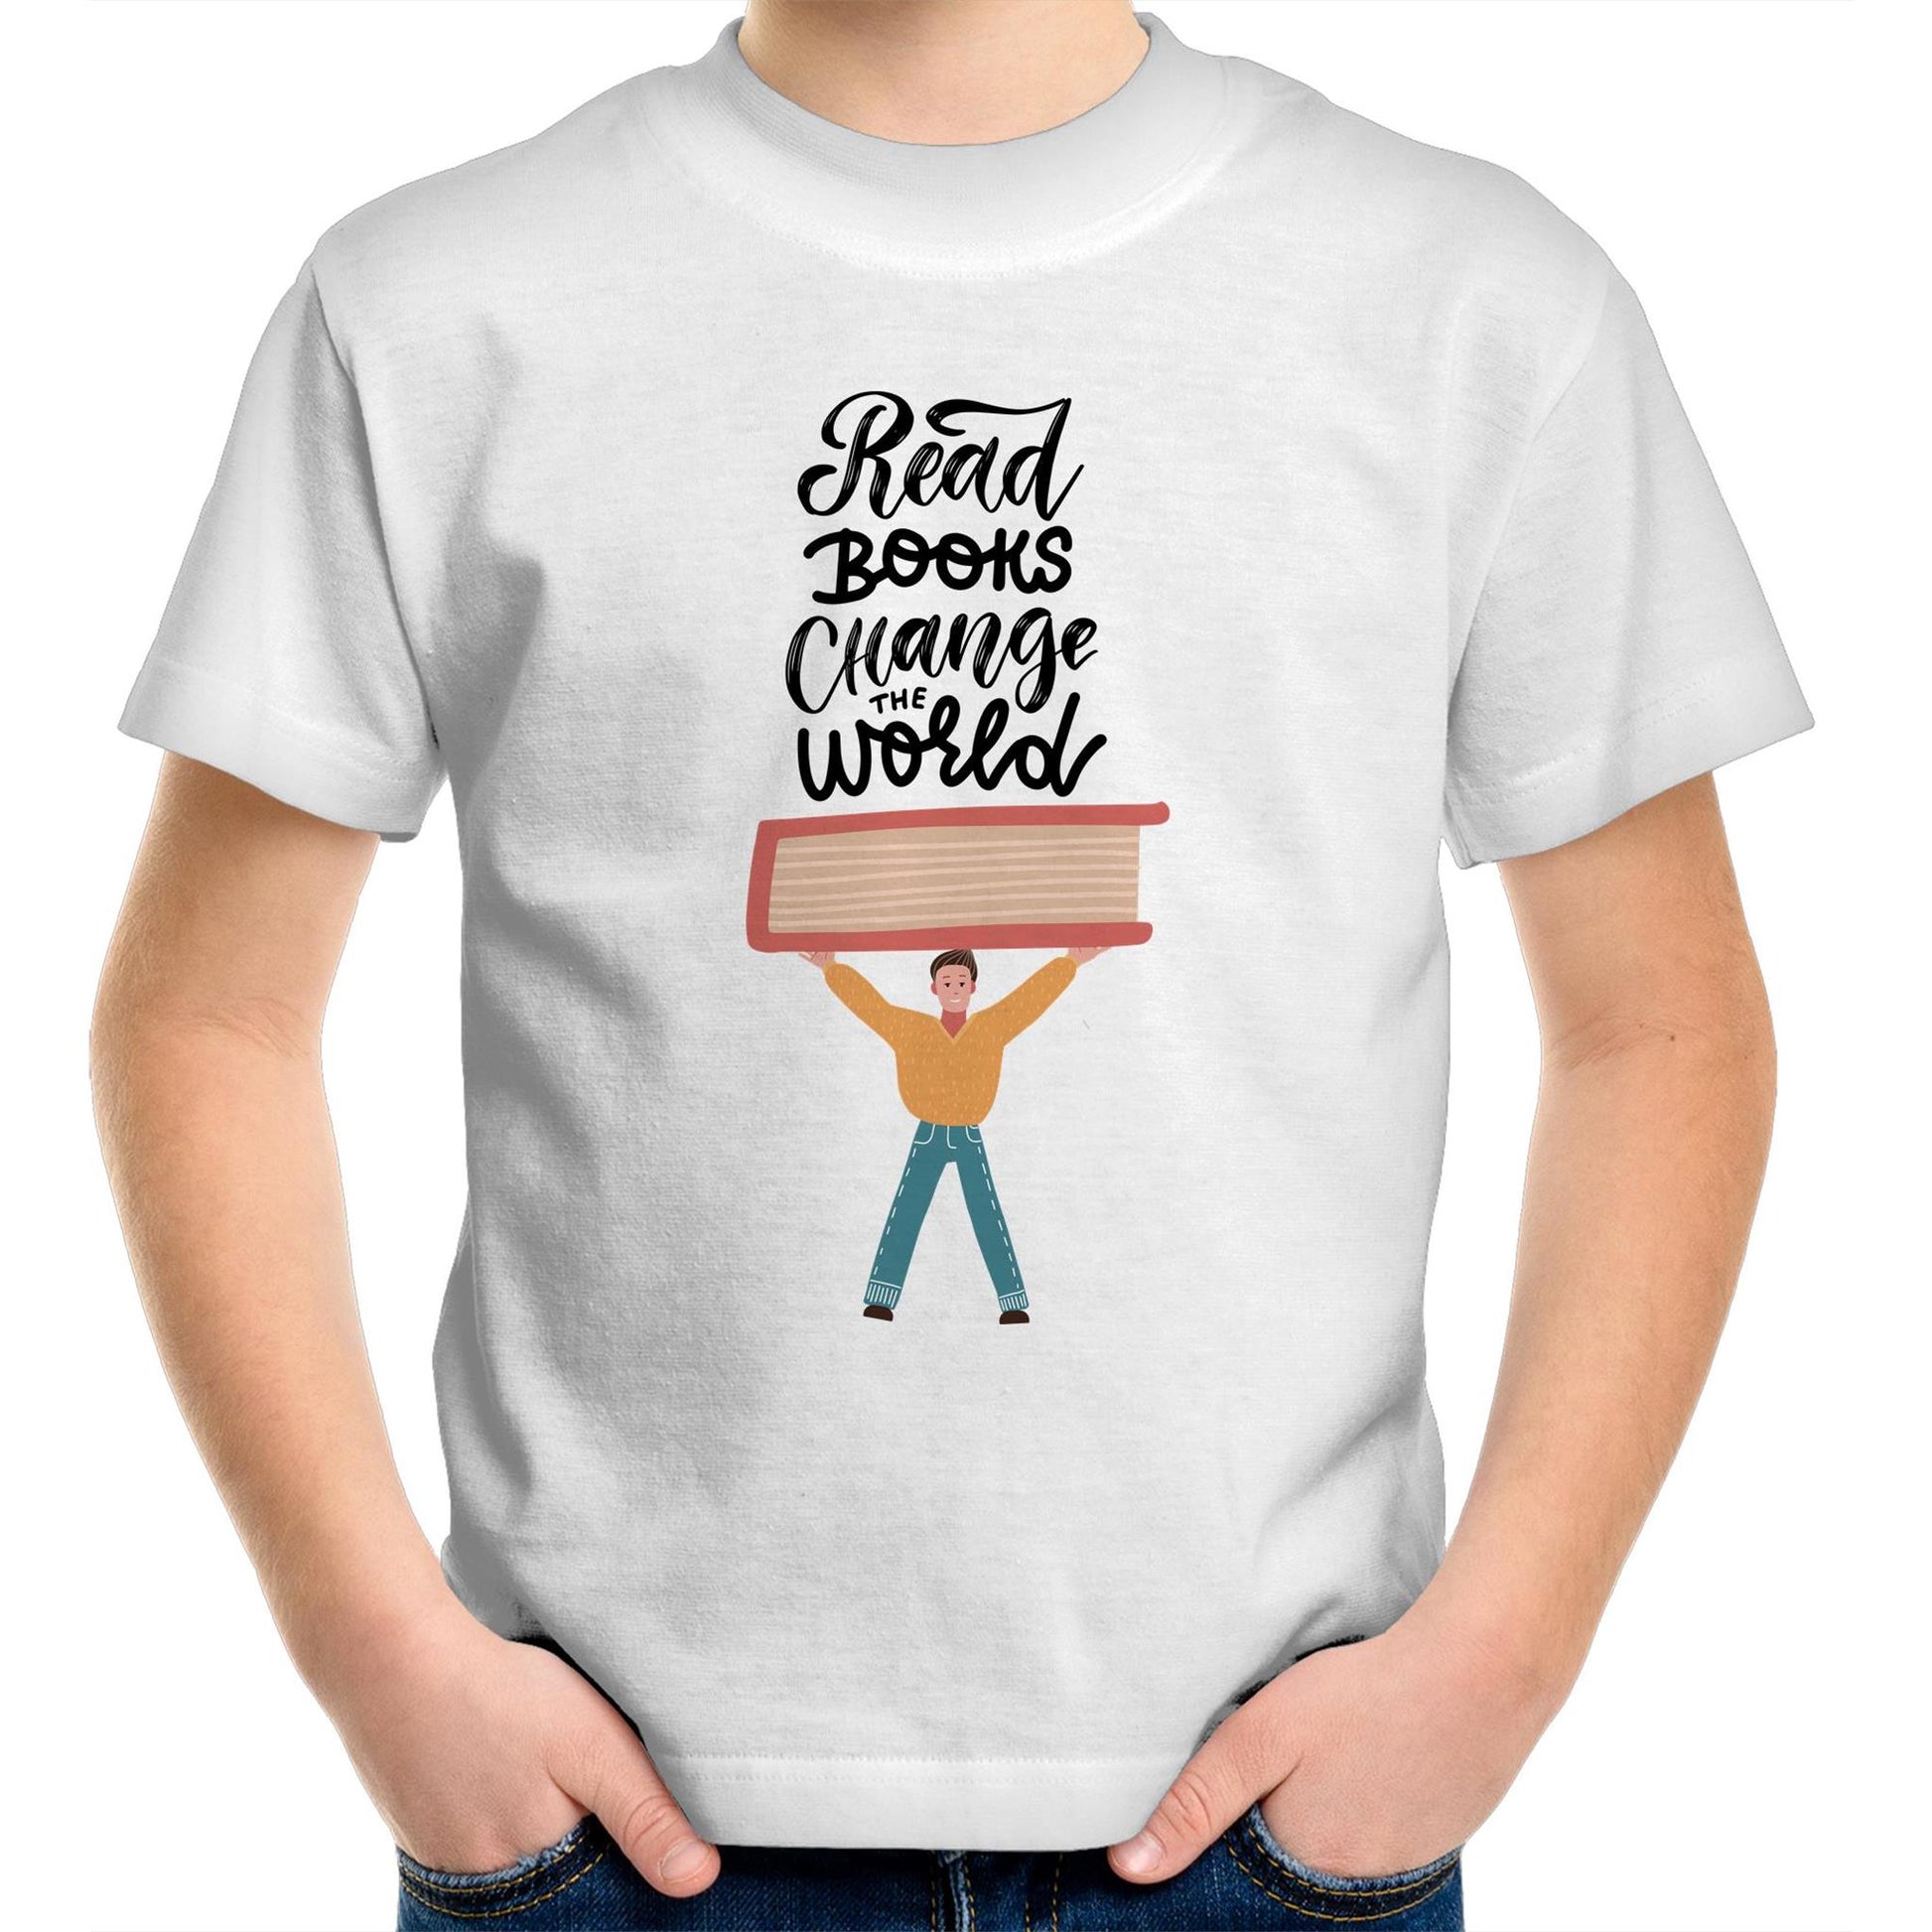 Read Books, Change The World - Kids Youth Crew T-Shirt White Kids Youth T-shirt Reading